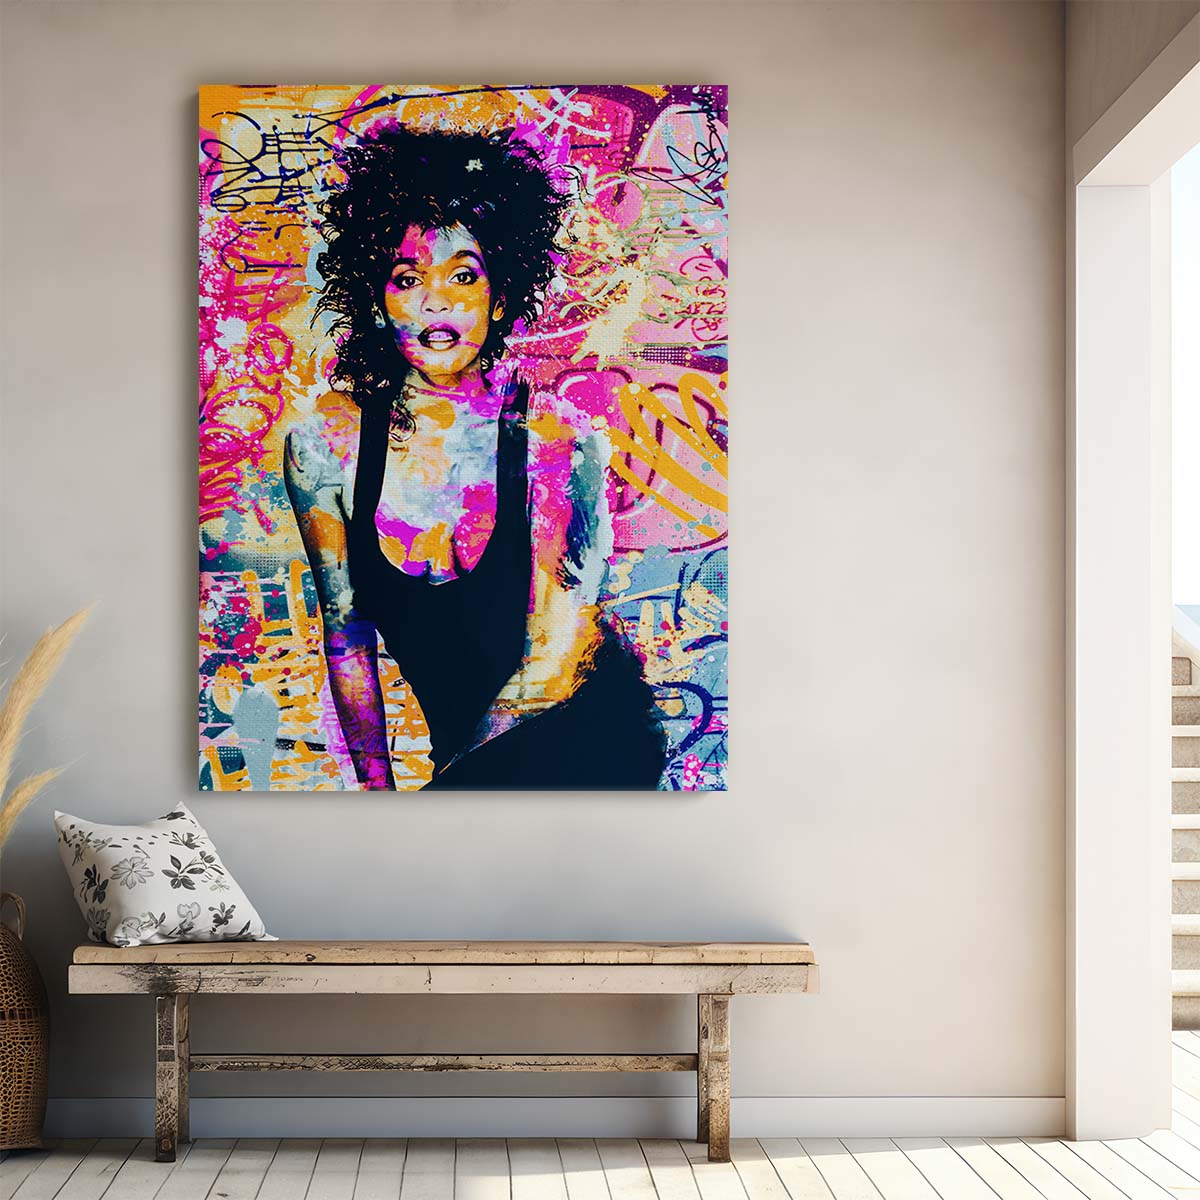 Whitney Houston Graffiti Pop Wall Art by Luxuriance Designs. Made in USA.